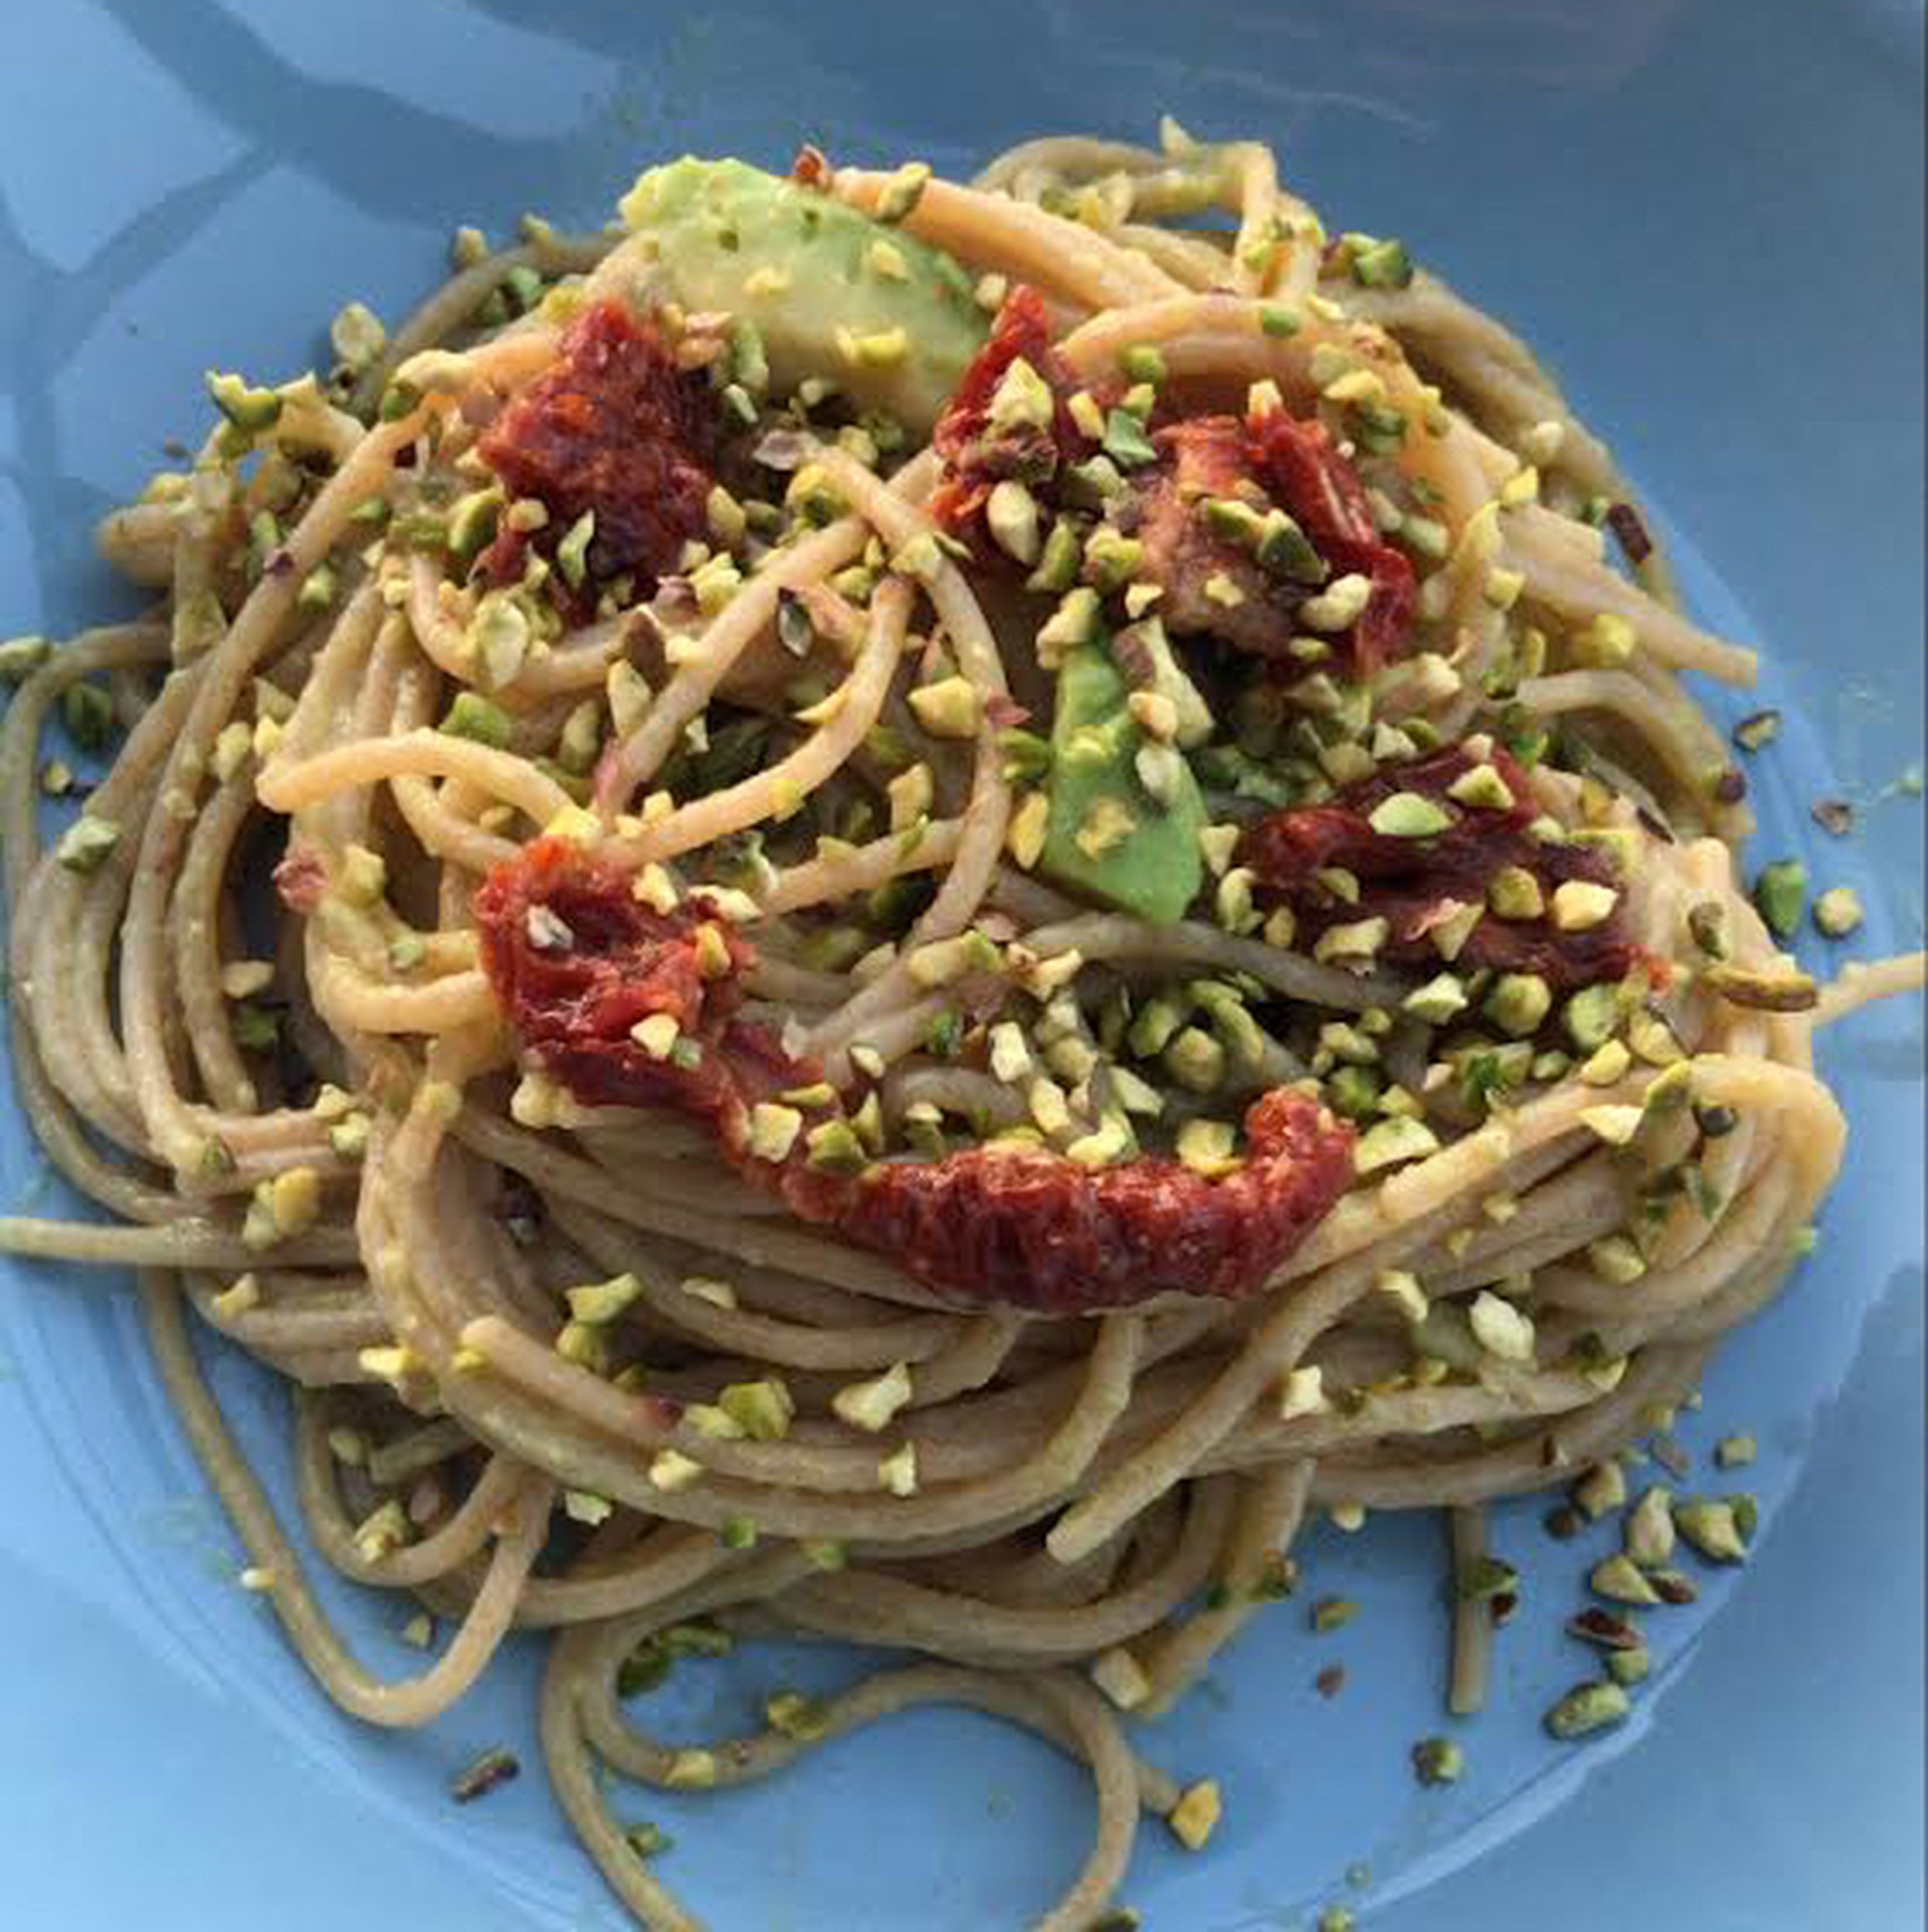 Wholemeal spaghetti with avocado cream and tomatoes